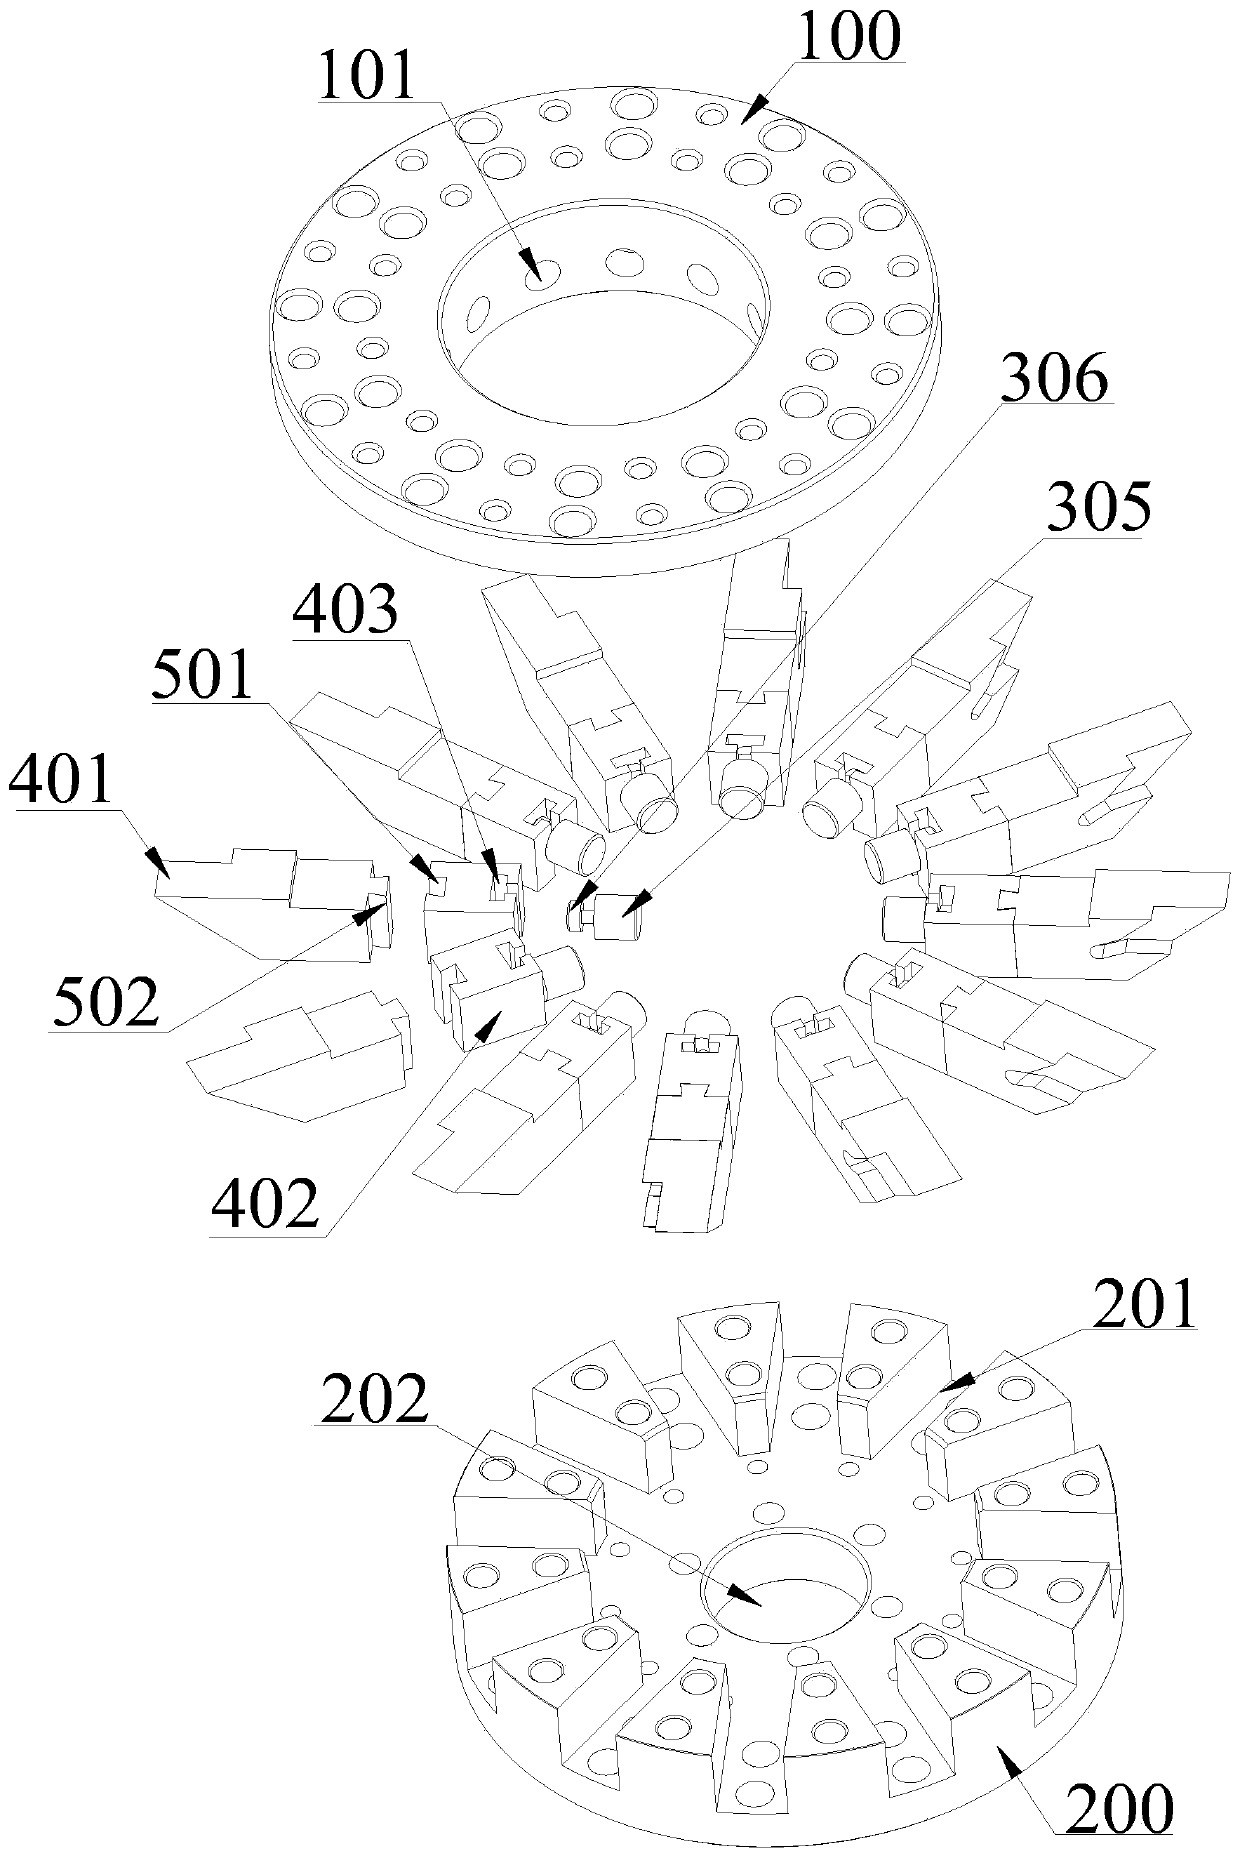 Cutter disc structure of digital controlled lathe